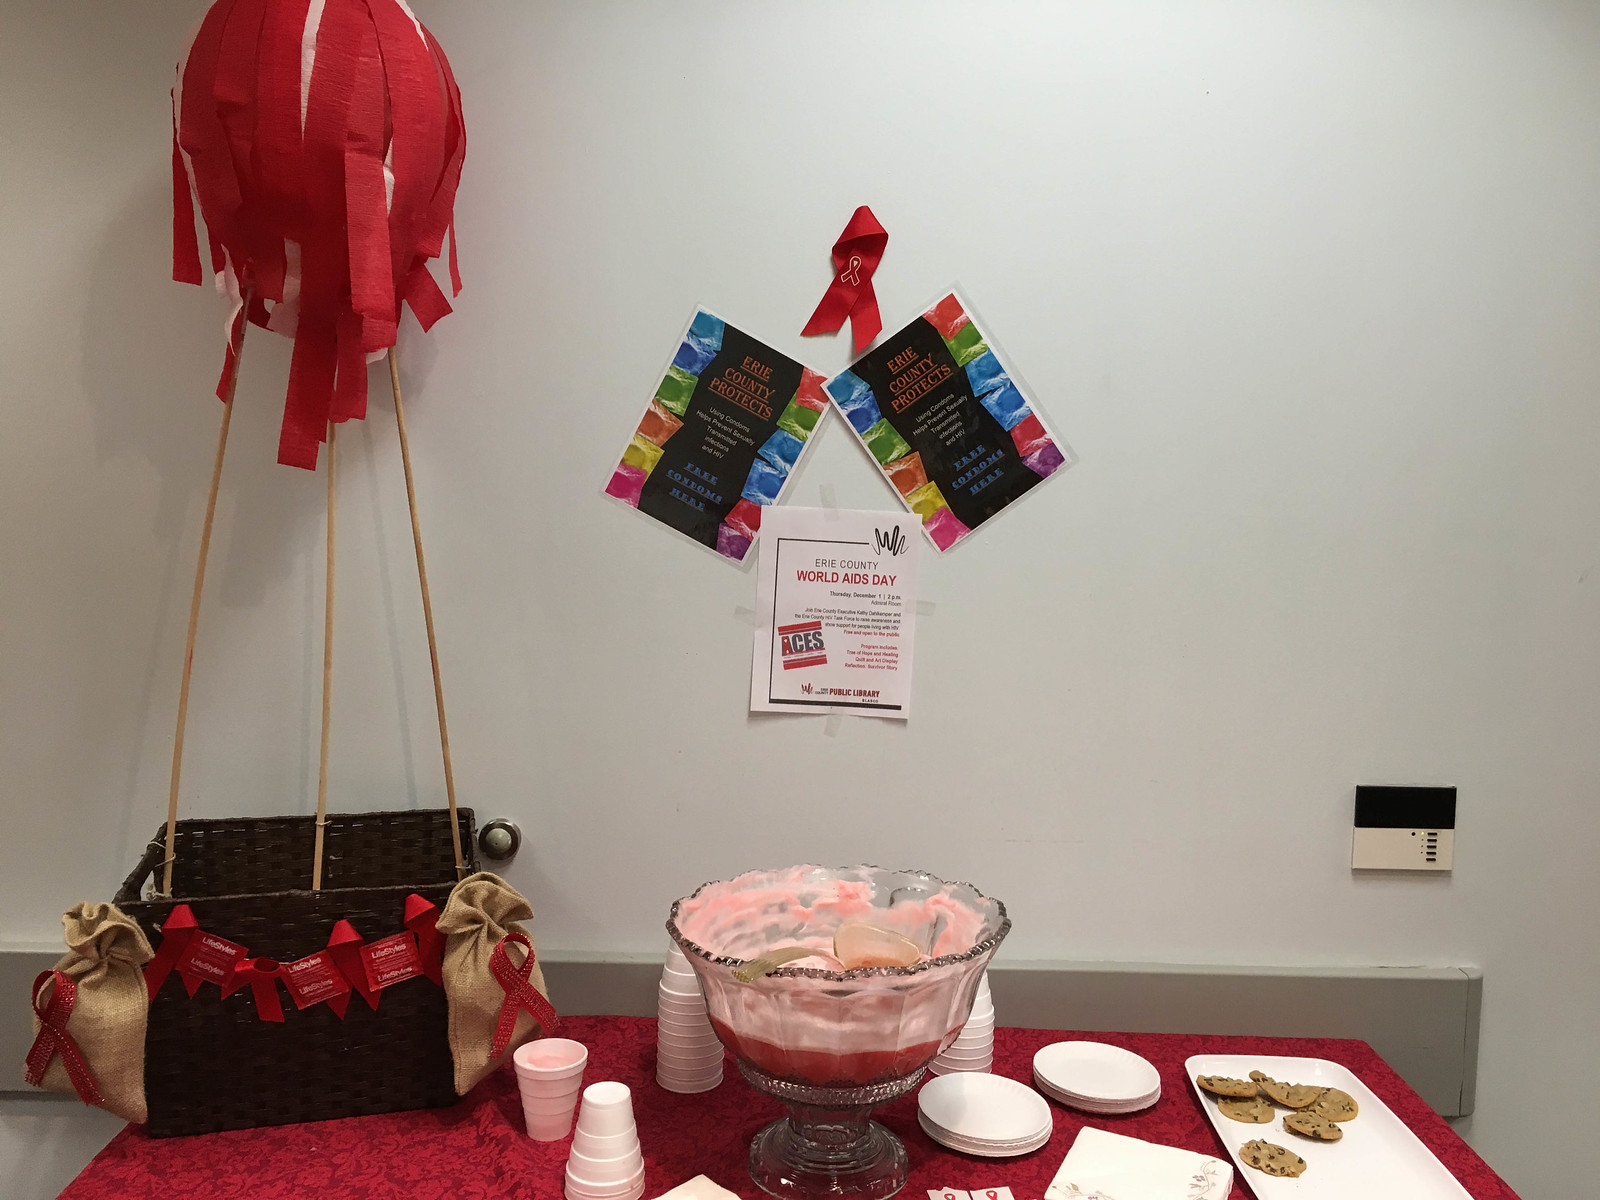 On Thursday, December 1, 2016, Erie County HIV Task Force had a presentation for World AIDS Day at the Blasco Public Library, 160 E Front St, Erie PA. The event included a display of AIDS quilt panels and other HIV-related art work. Speakers included Erie